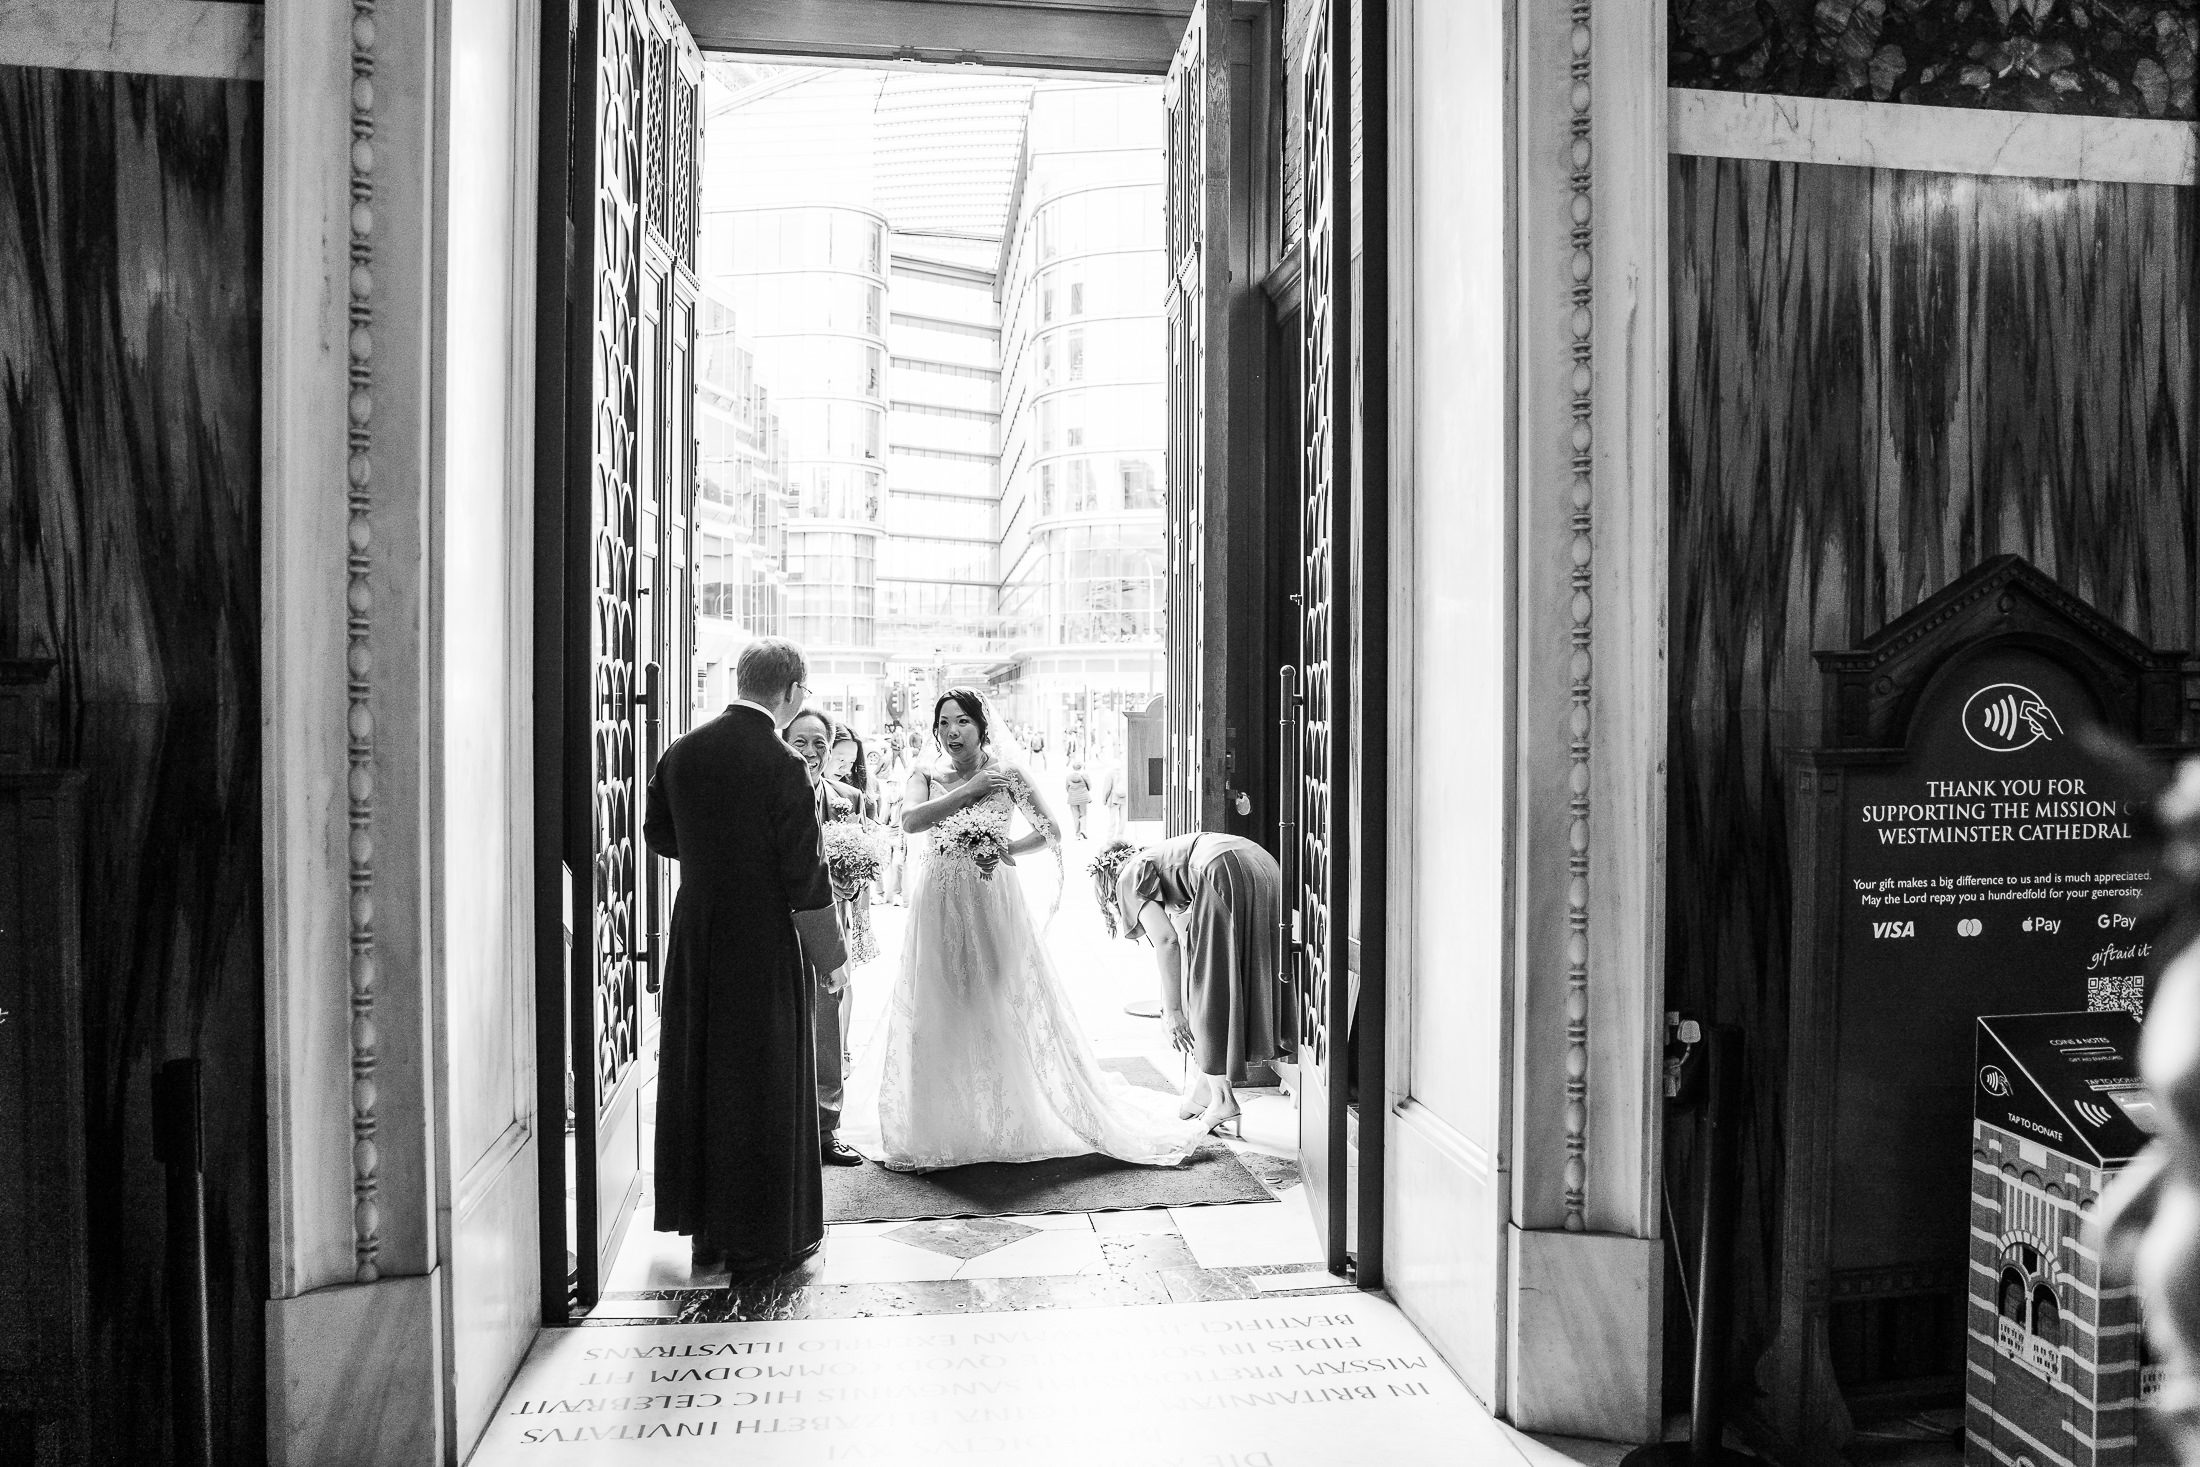 Reportage photography of a Westminster Cathedral Wedding.